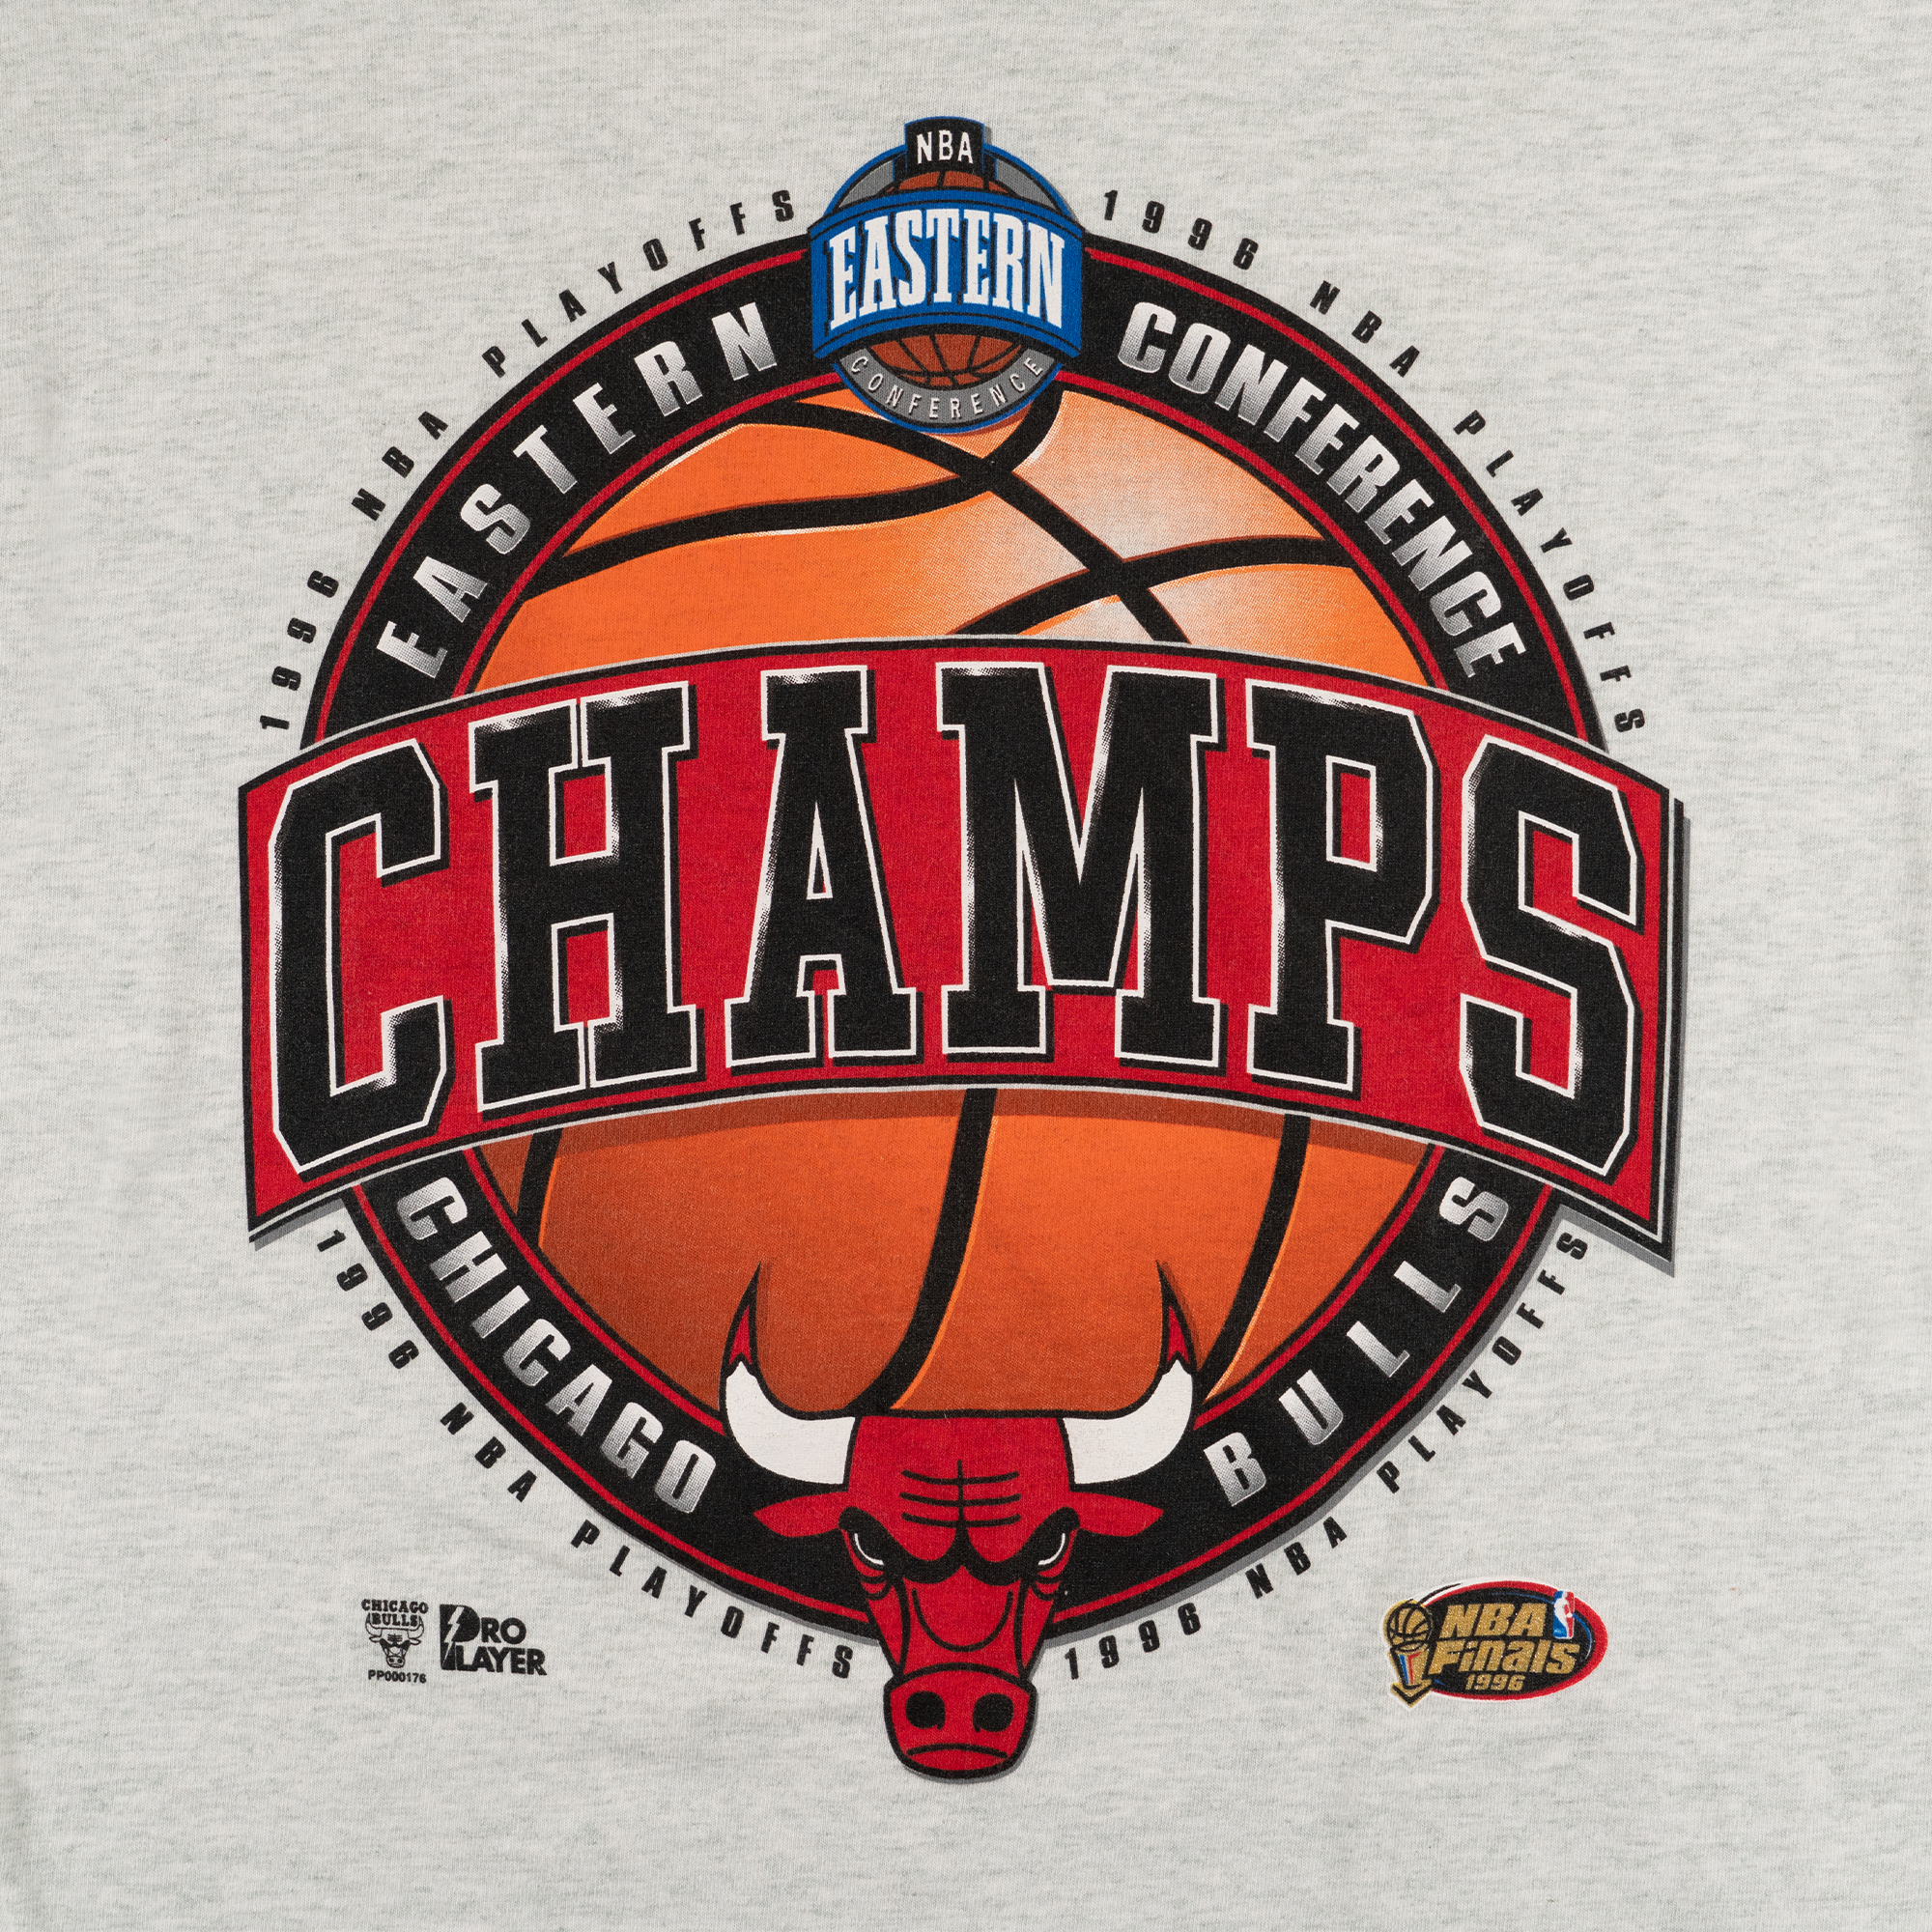 Chicago Bulls 1996 Eastern Conference Champs Salem Tee Grey-PLUS